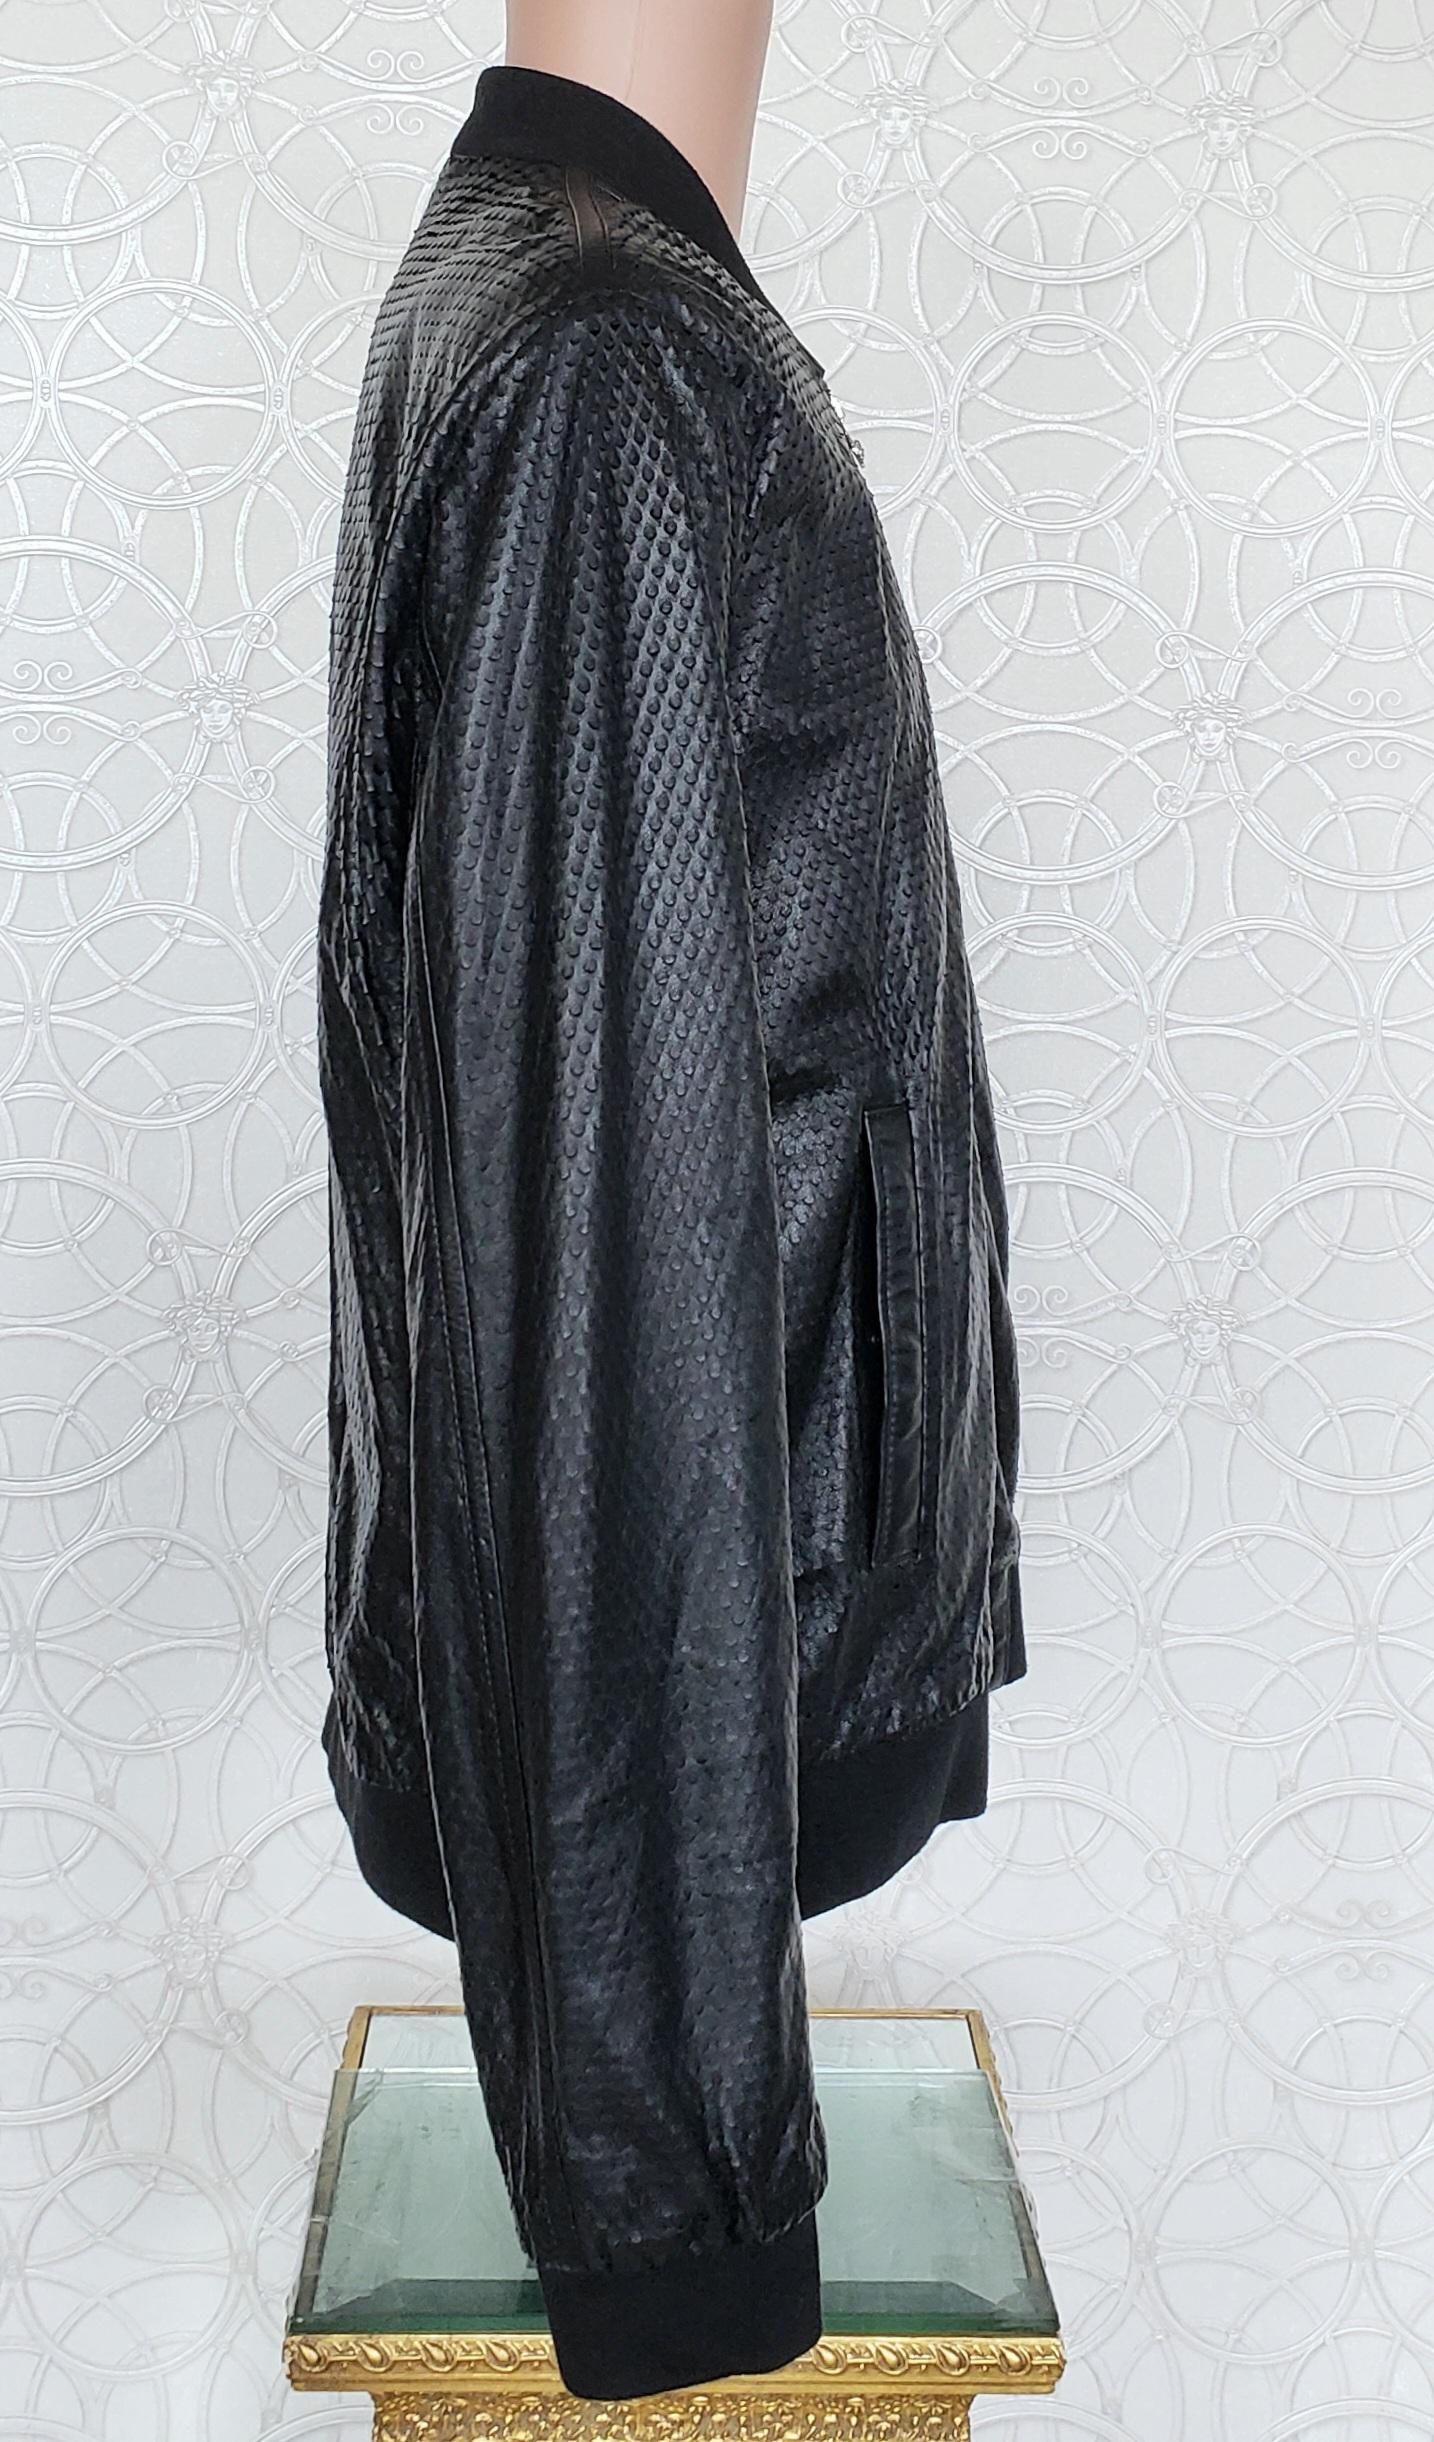 New VERSACE COLLECTION PERFORATED LAMB LEATHER BLACK BOMBER JACKET 56 - 3XL In New Condition For Sale In Montgomery, TX